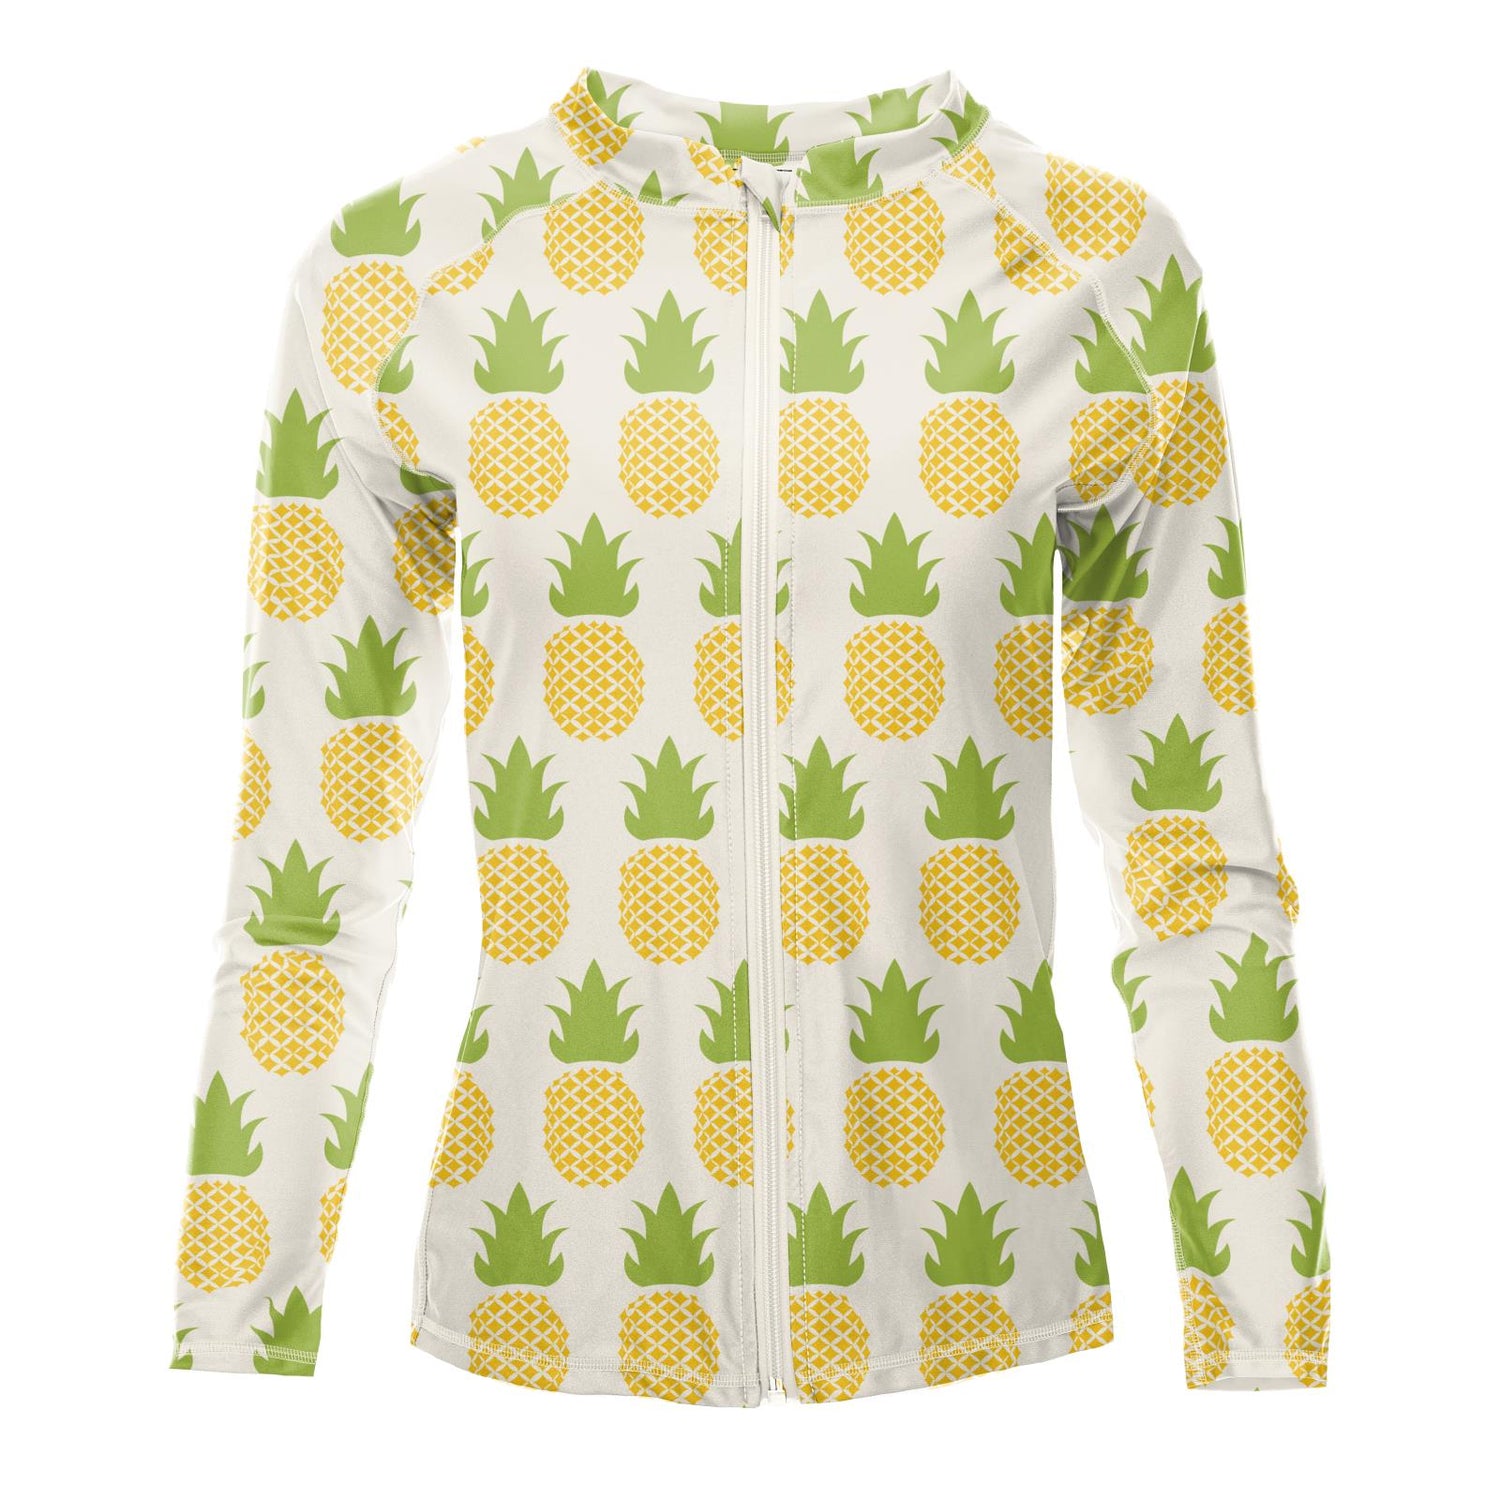 Women's Print Long Sleeve Swim and Sun Cover Up in Natural Pineapple